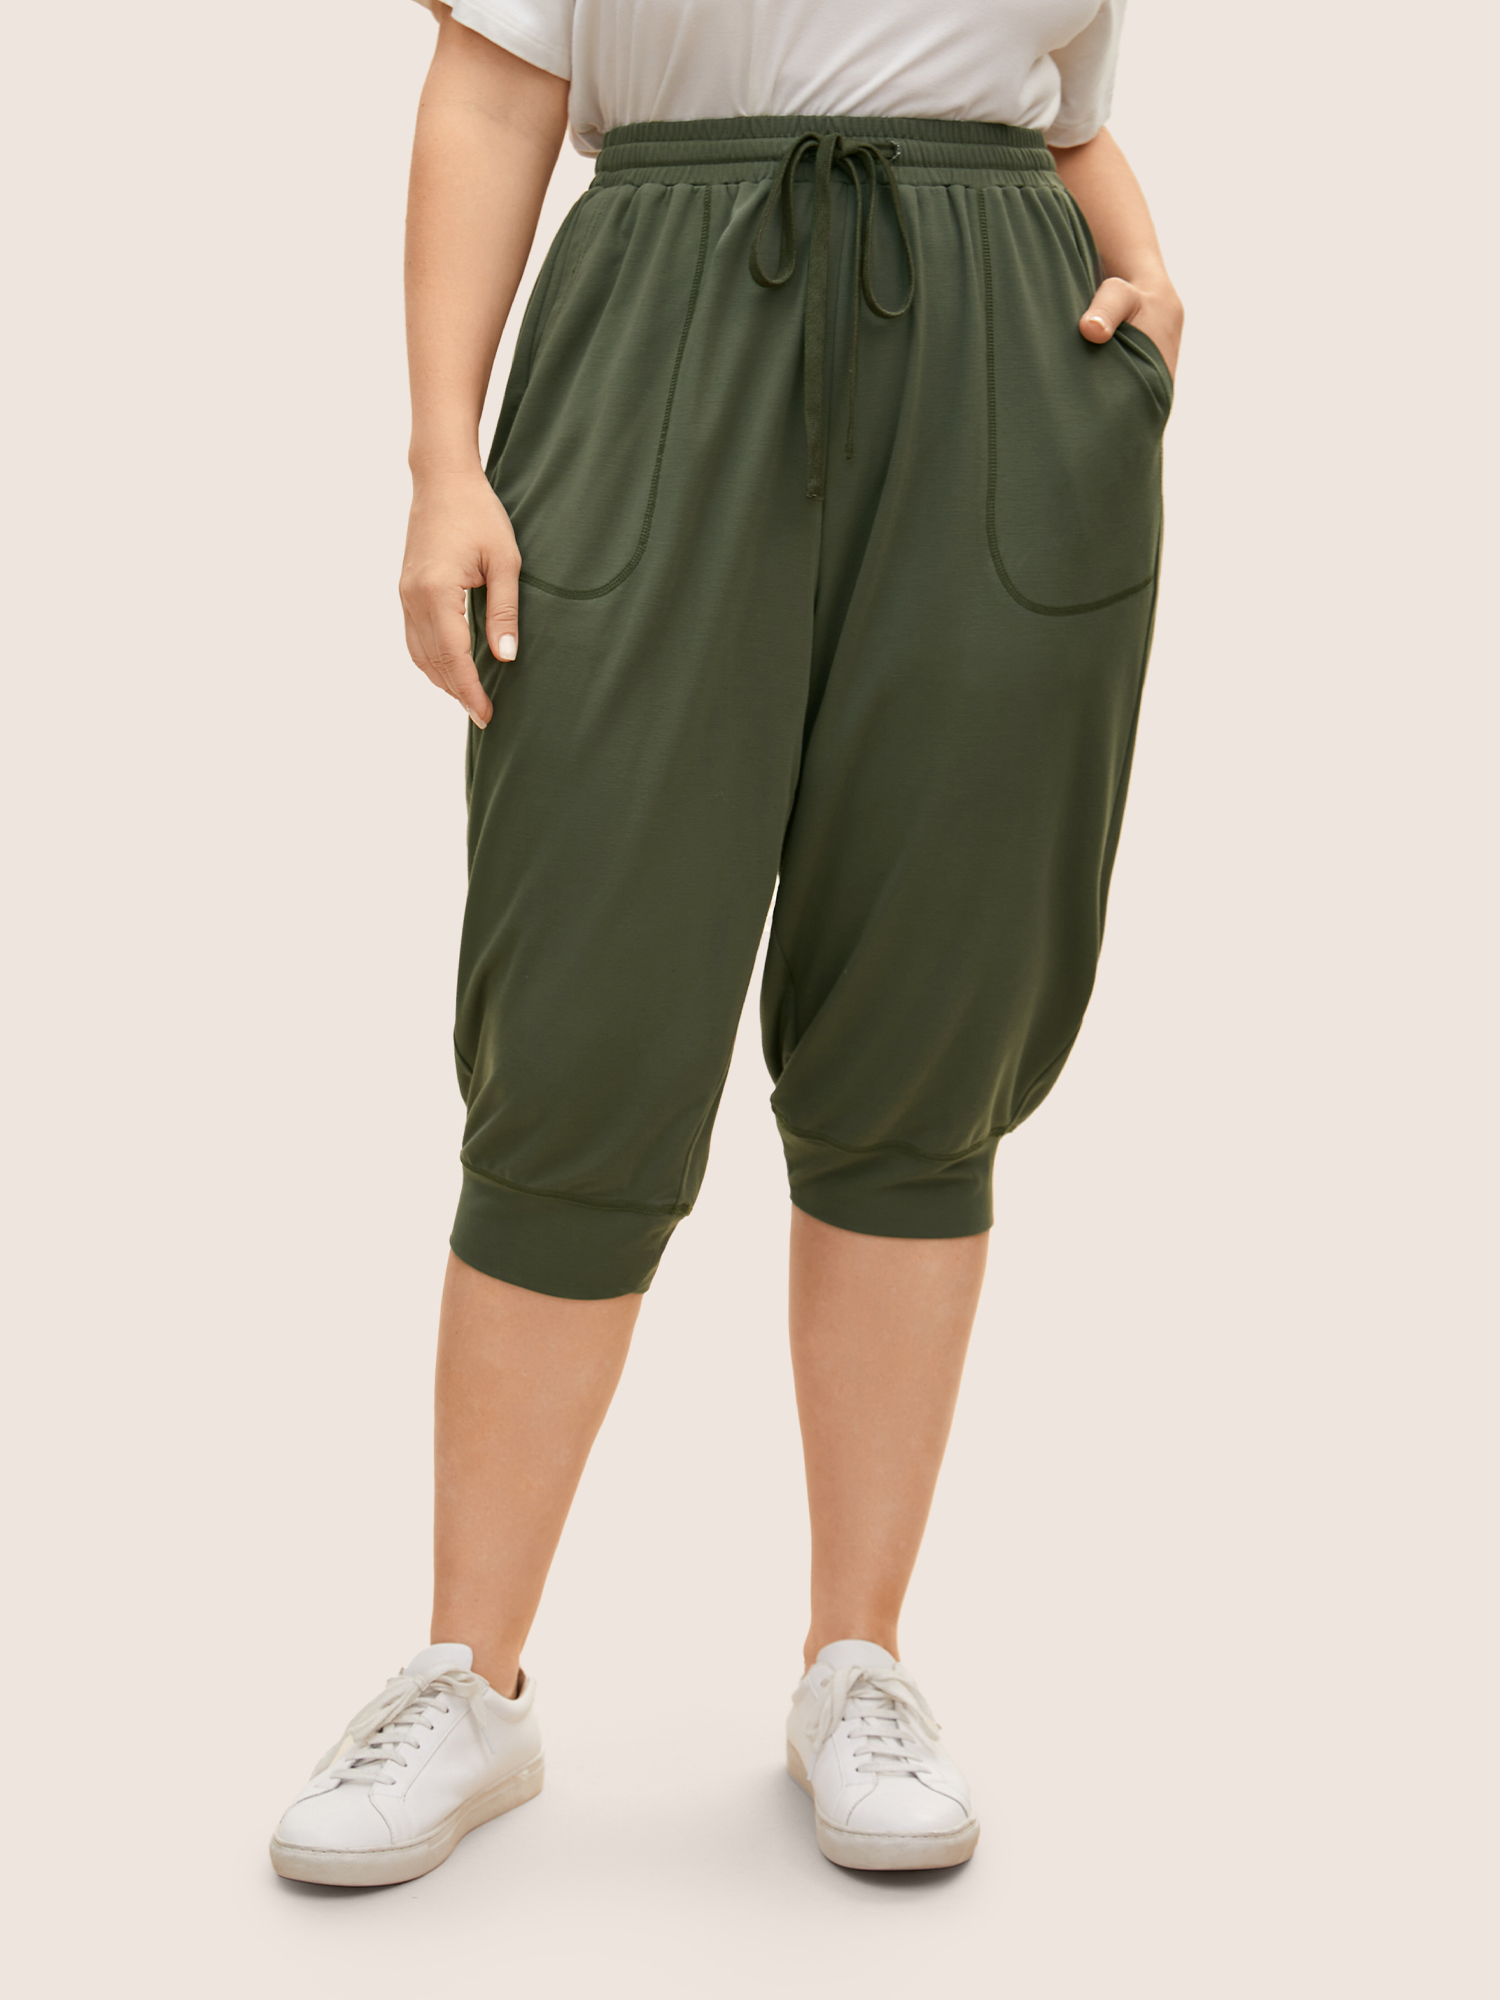 

Plus Size Solid Drawstring Topstitching Mid Rise Carrot Pants Women ArmyGreen Casual Mid Rise Everyday Pants BloomChic